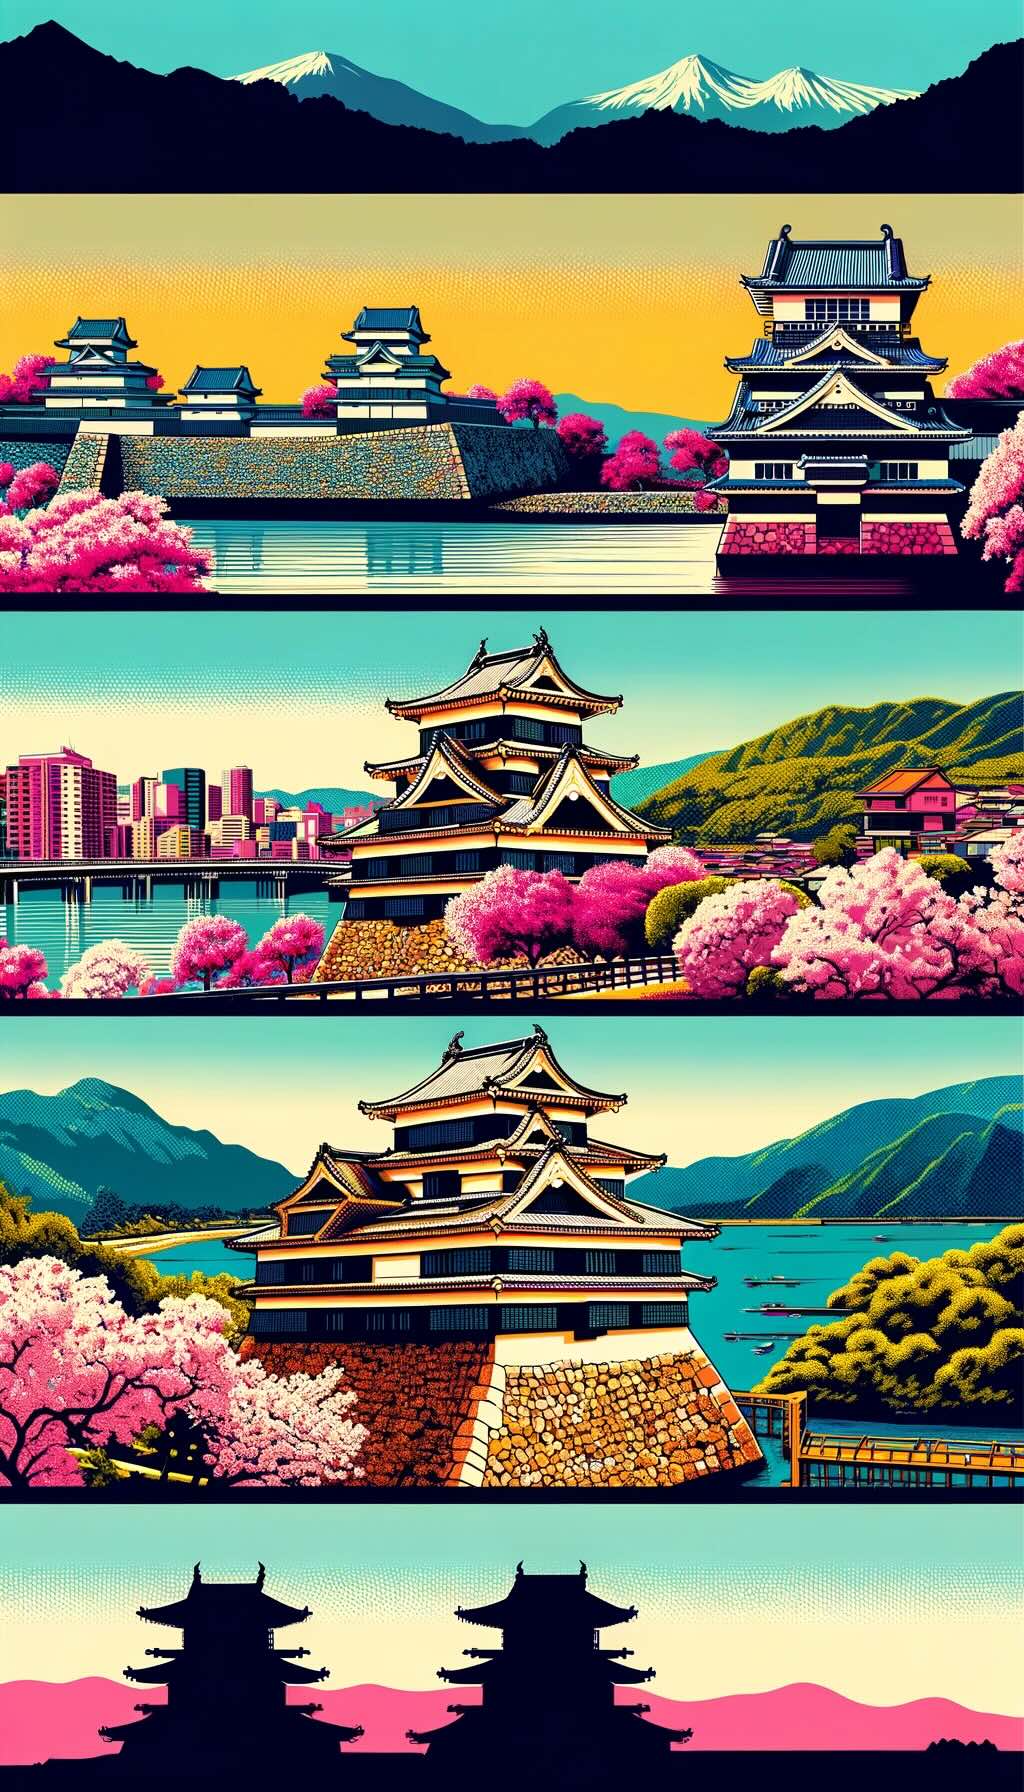 Three lesser-known Japanese castles: Inuyama Castle, Hirosaki Castle, and Uwajima Castle. Each castle is depicted with its unique architectural styles, historical significance, and scenic beauty, capturing the essence of these remarkable and diverse structures